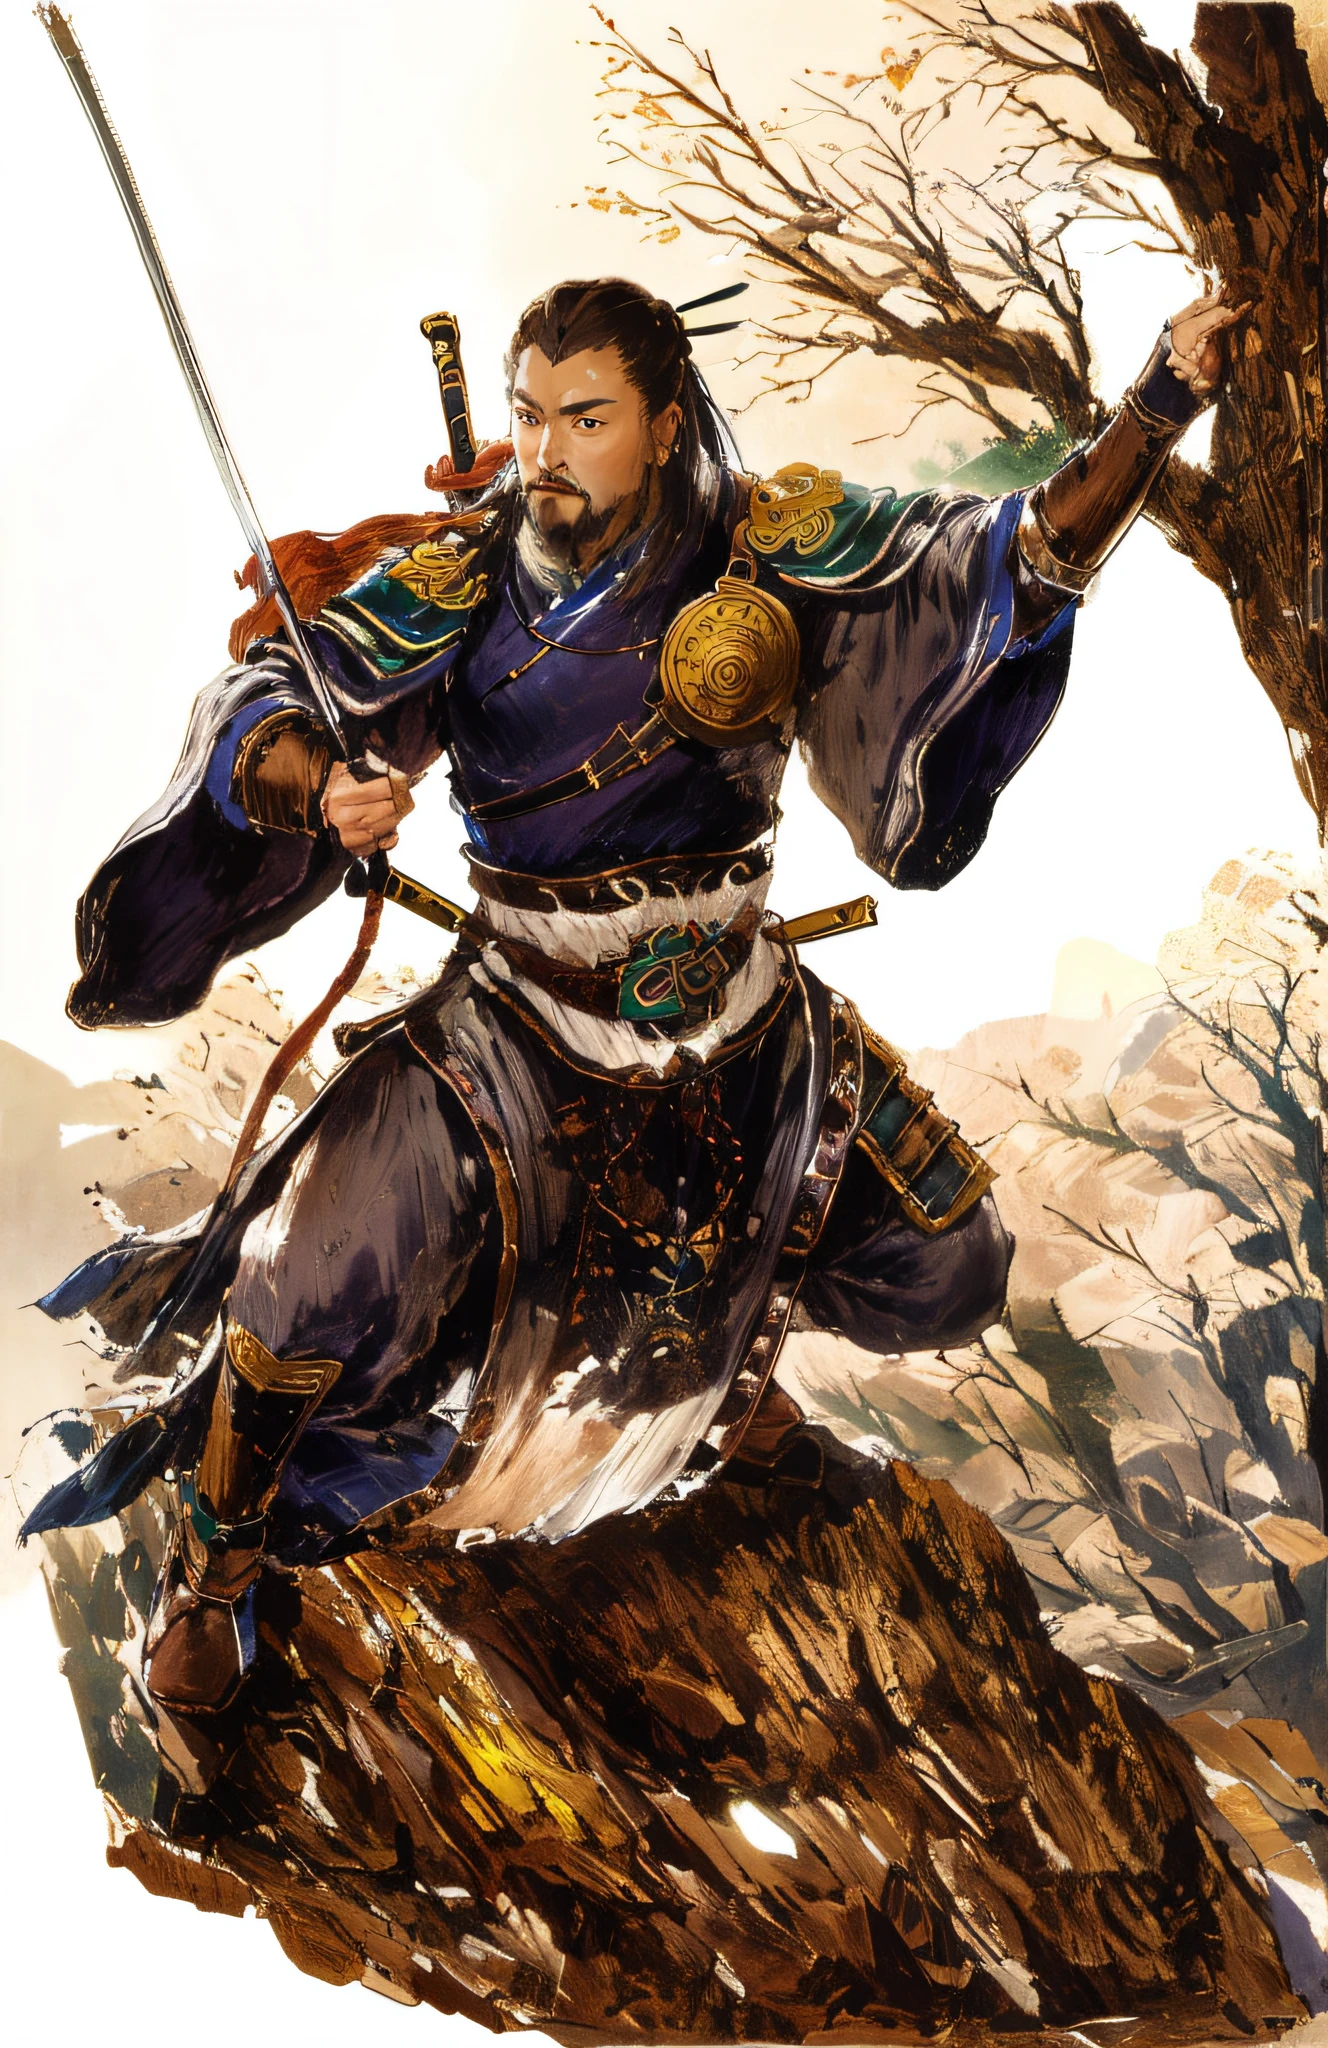 Draw one standing on the edge of a cliff，A warrior of the Song Dynasty climbing with a rope, Carrying a sword Chinese warrior, epic full color illustration, Inspired by Chen Danqing, The feeling comes from Shen Quan, Guan yu, Inspired by De Dunbon, Inspired by Hu Zaobin, inspired by Zhu Derun, Inspired by Huang Shen, inspired by Li Rongjin, Inspired by Shen Zhou，inspired by Yang Borun, Fanart, by Ni Yuanlu, inspired by Wang Jian, author：Chen Danqing, inspired by Lu Zhi, author：Yoon Du-seop, atlantean warrior, inspired by Li Kan, tai warlord, Snoop dogs as barbarians, ancient warrior, naranbaatar ganbold, Bandits, zhangfei